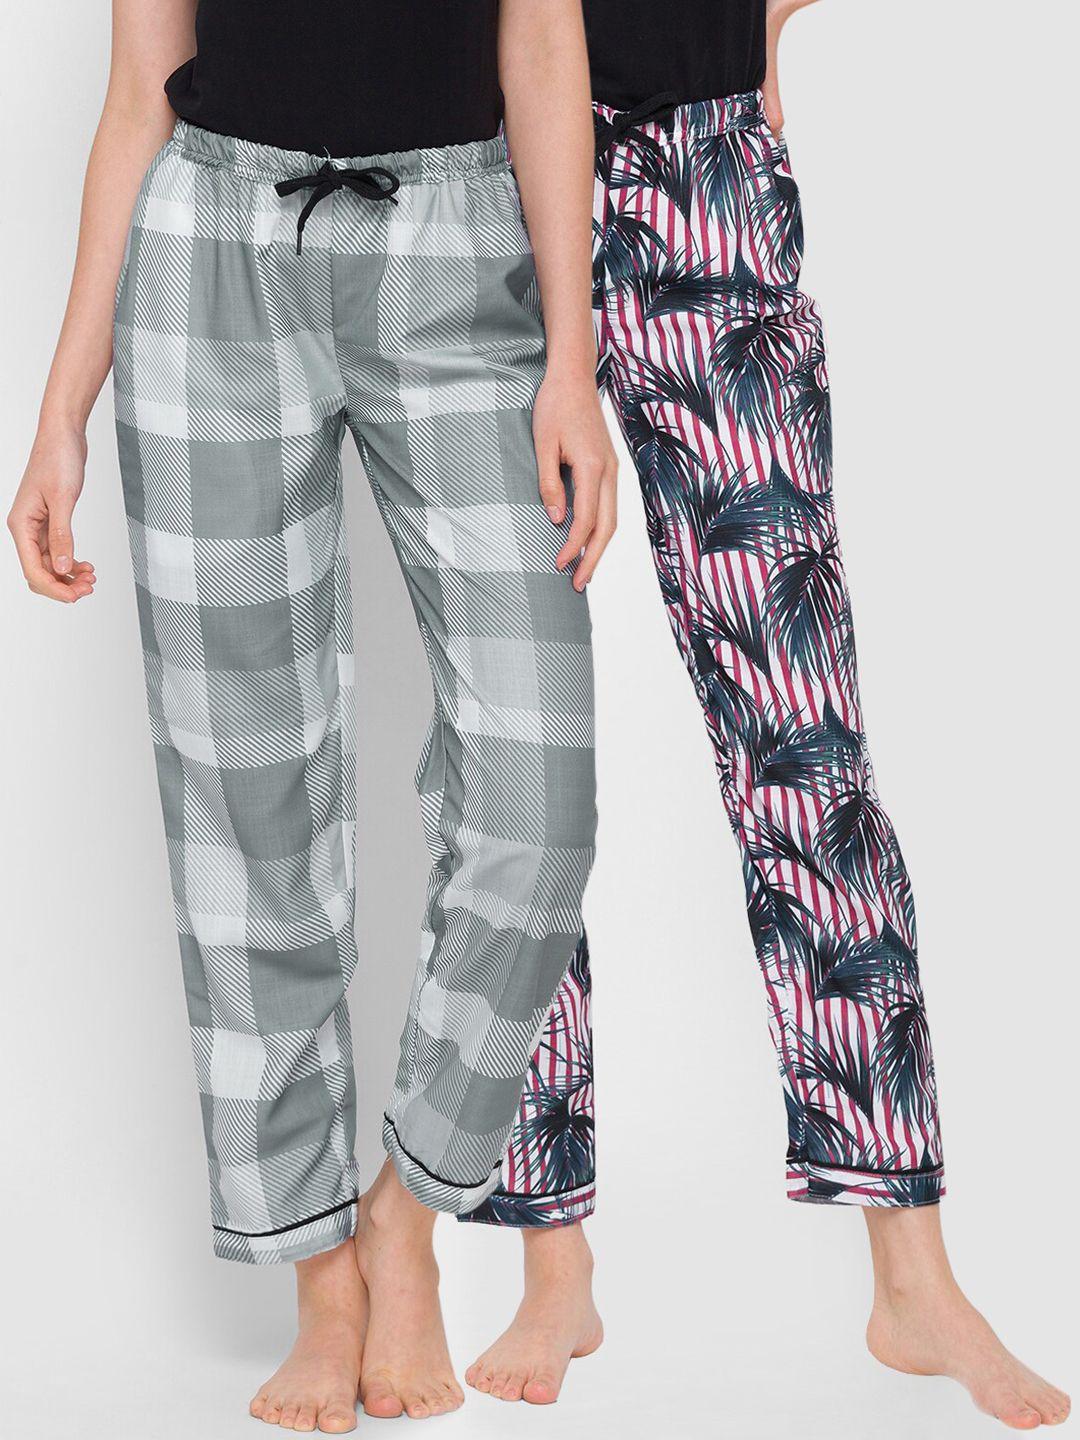 fashionrack-women-pack-of-2-red-&-grey-cotton-printed-lounge-pants